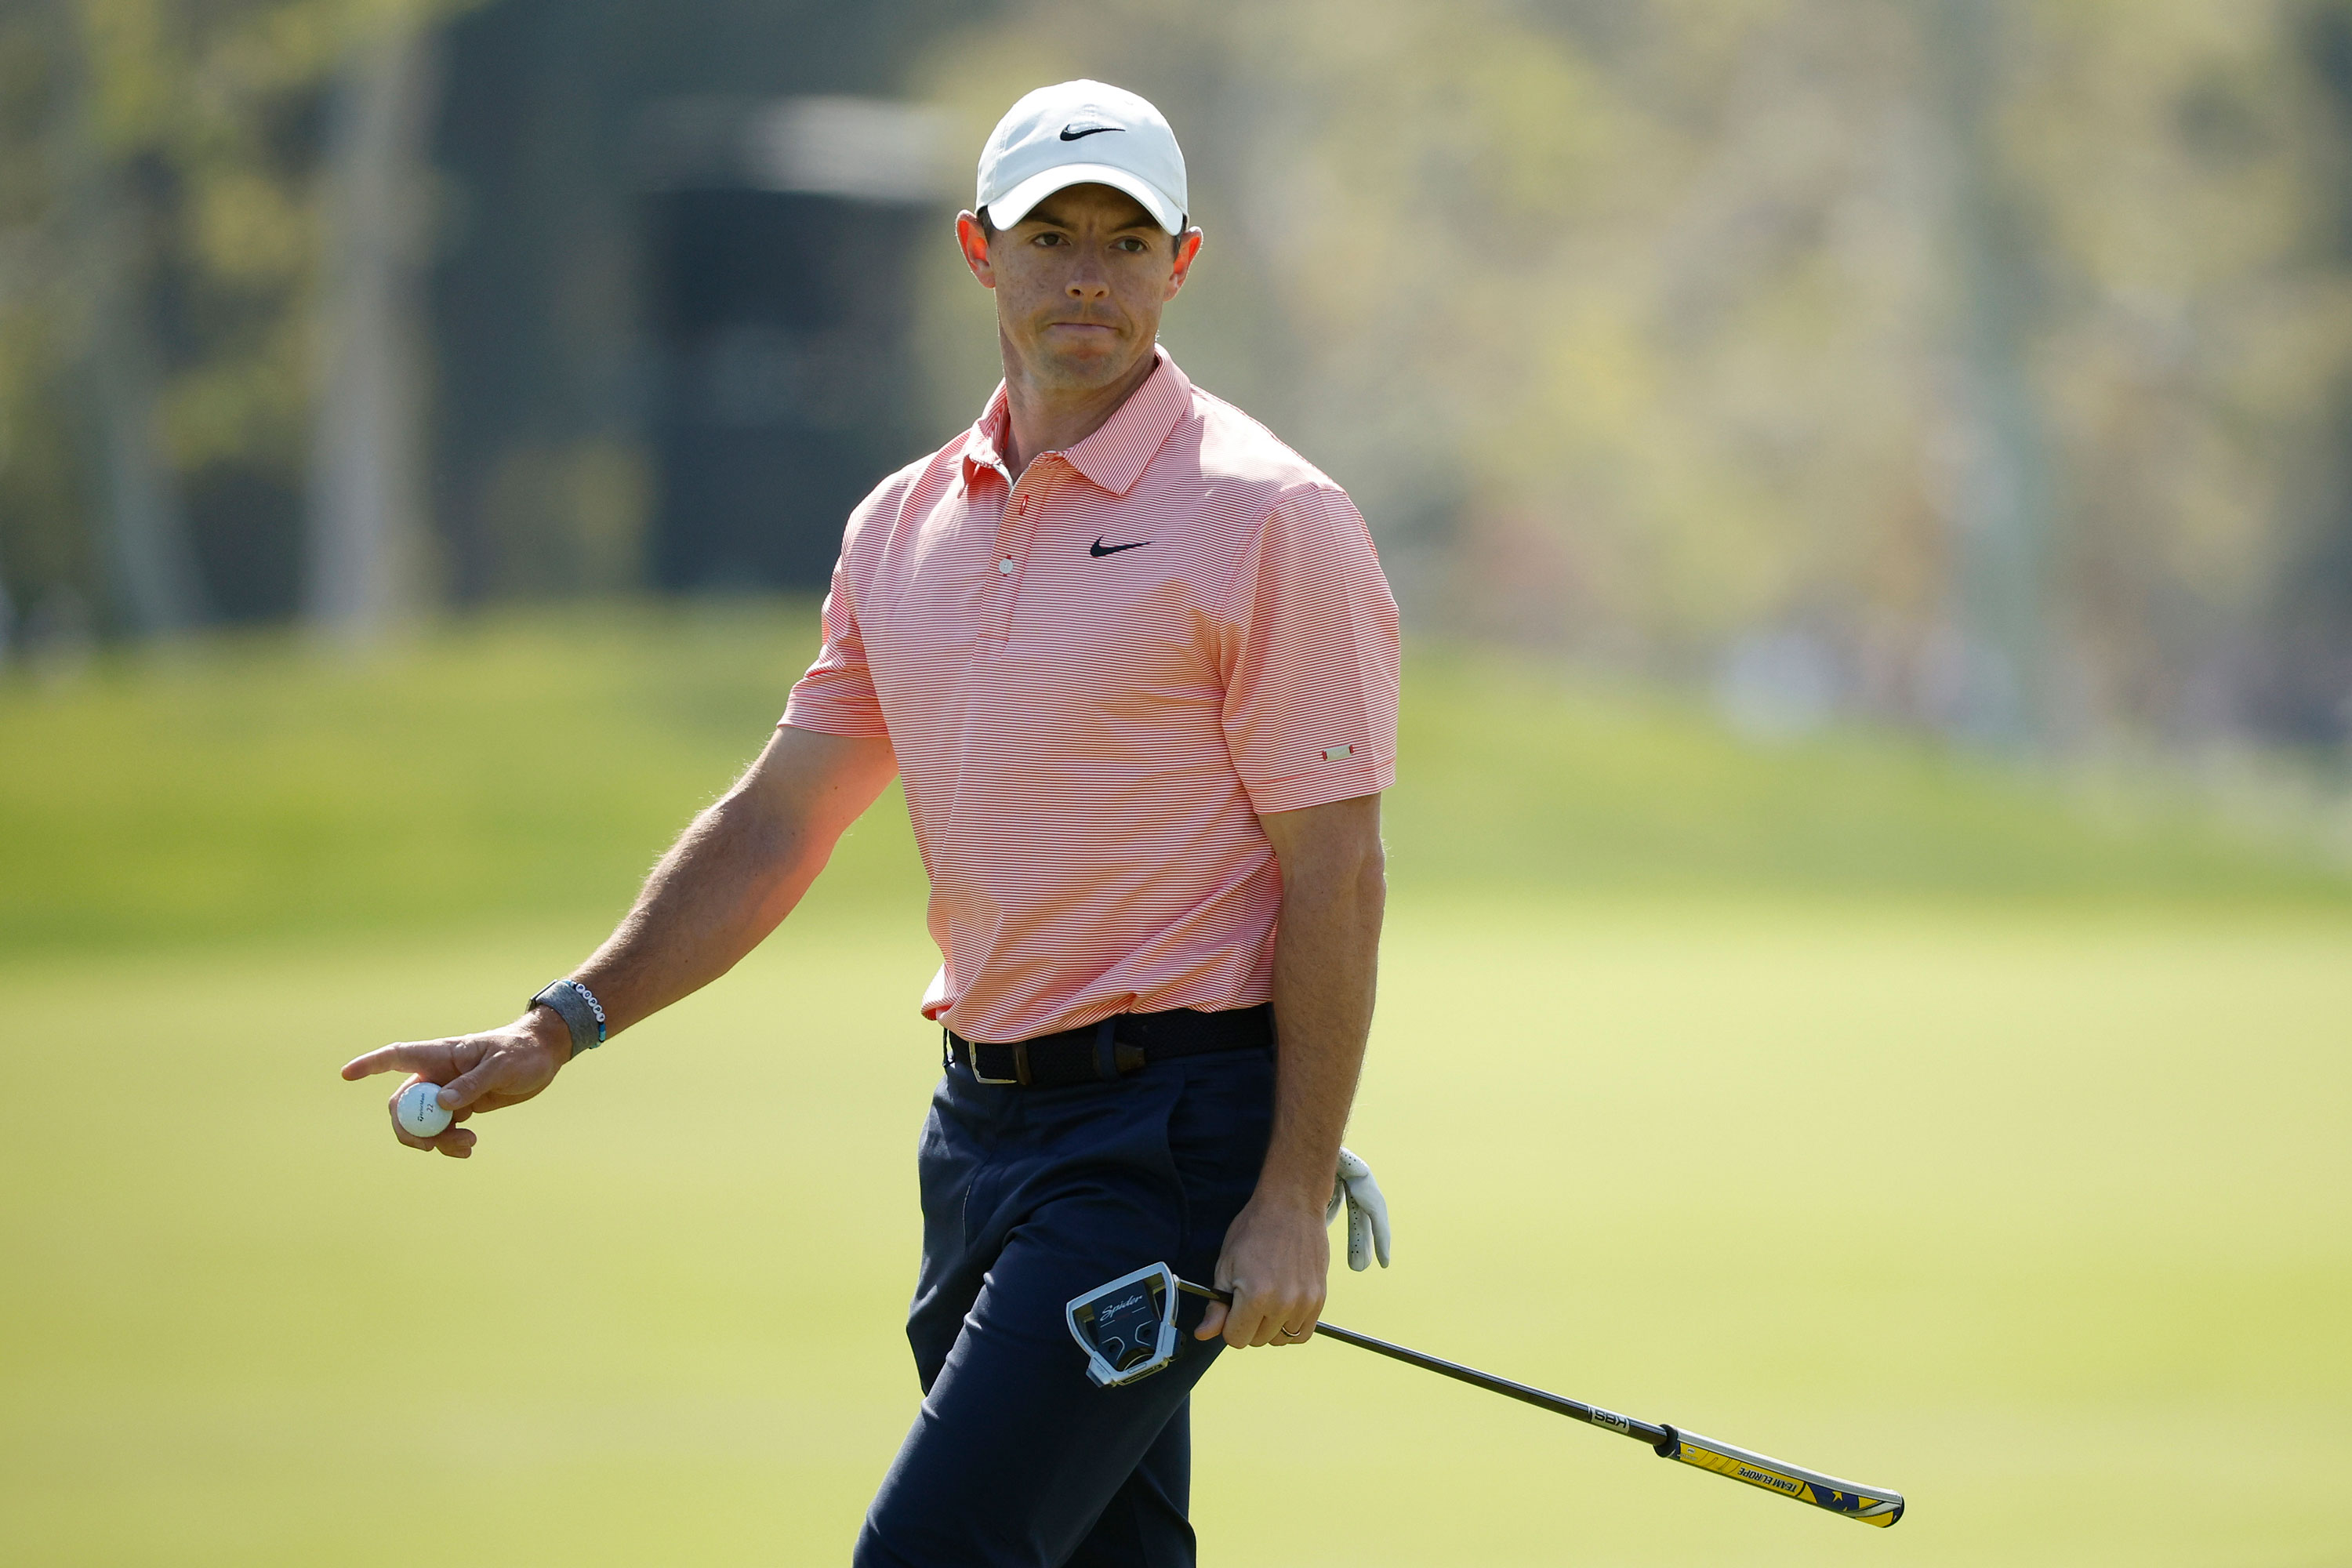 Rory McIlroy says Saudi league is dead in the water with latest player moves Whos left? Golf News and Tour Information GolfDigest